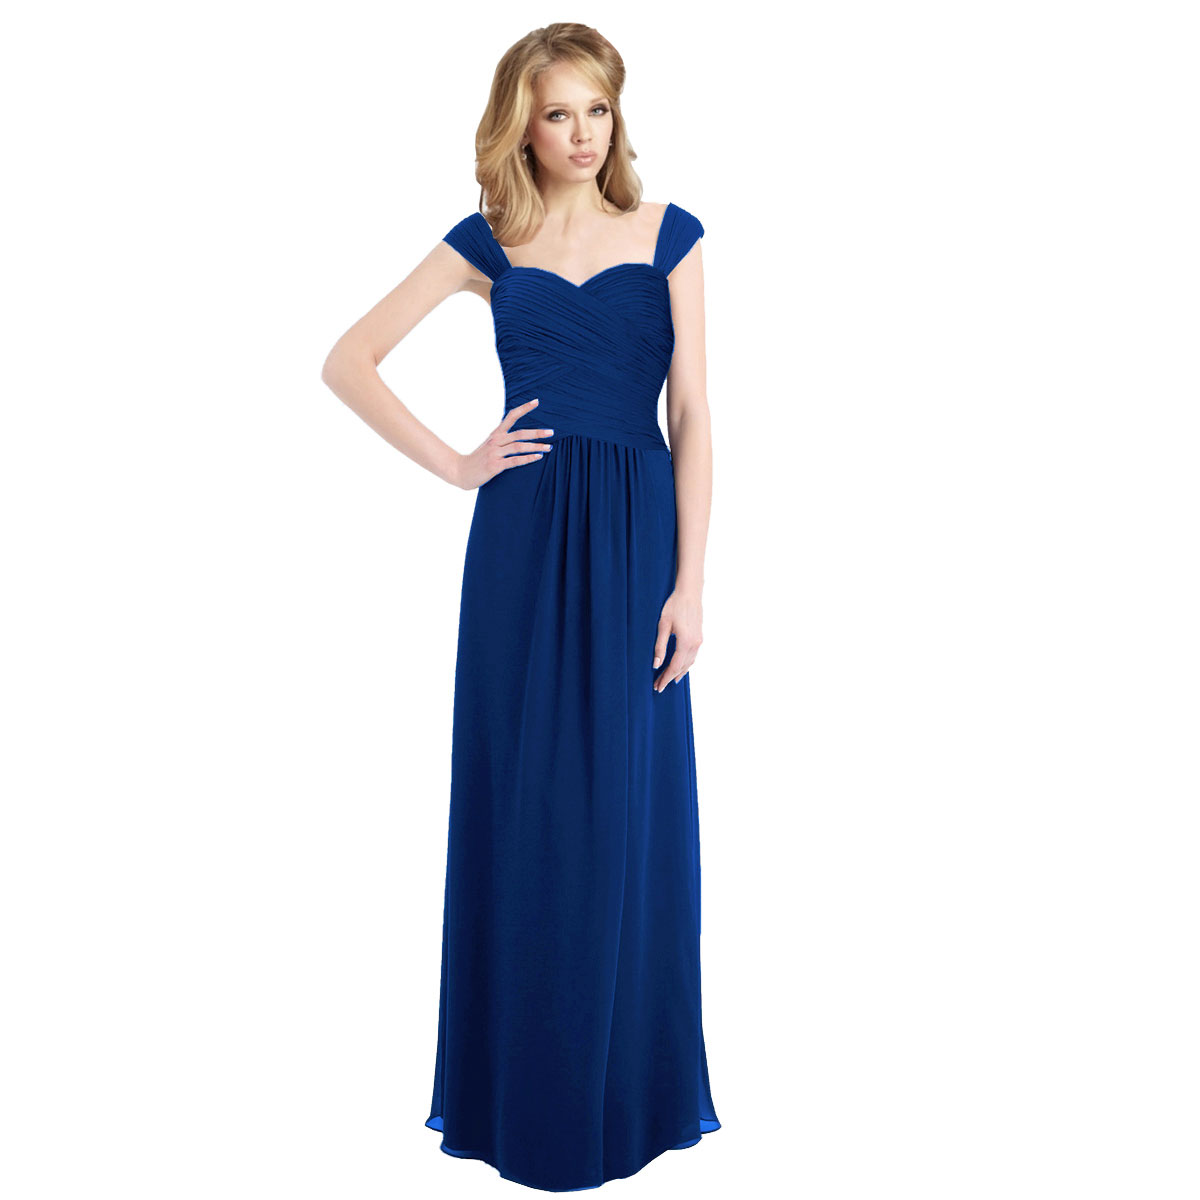 Sophisticated Chiffon Floor Length Formal Evening Gown Bridesmaid Dress ...